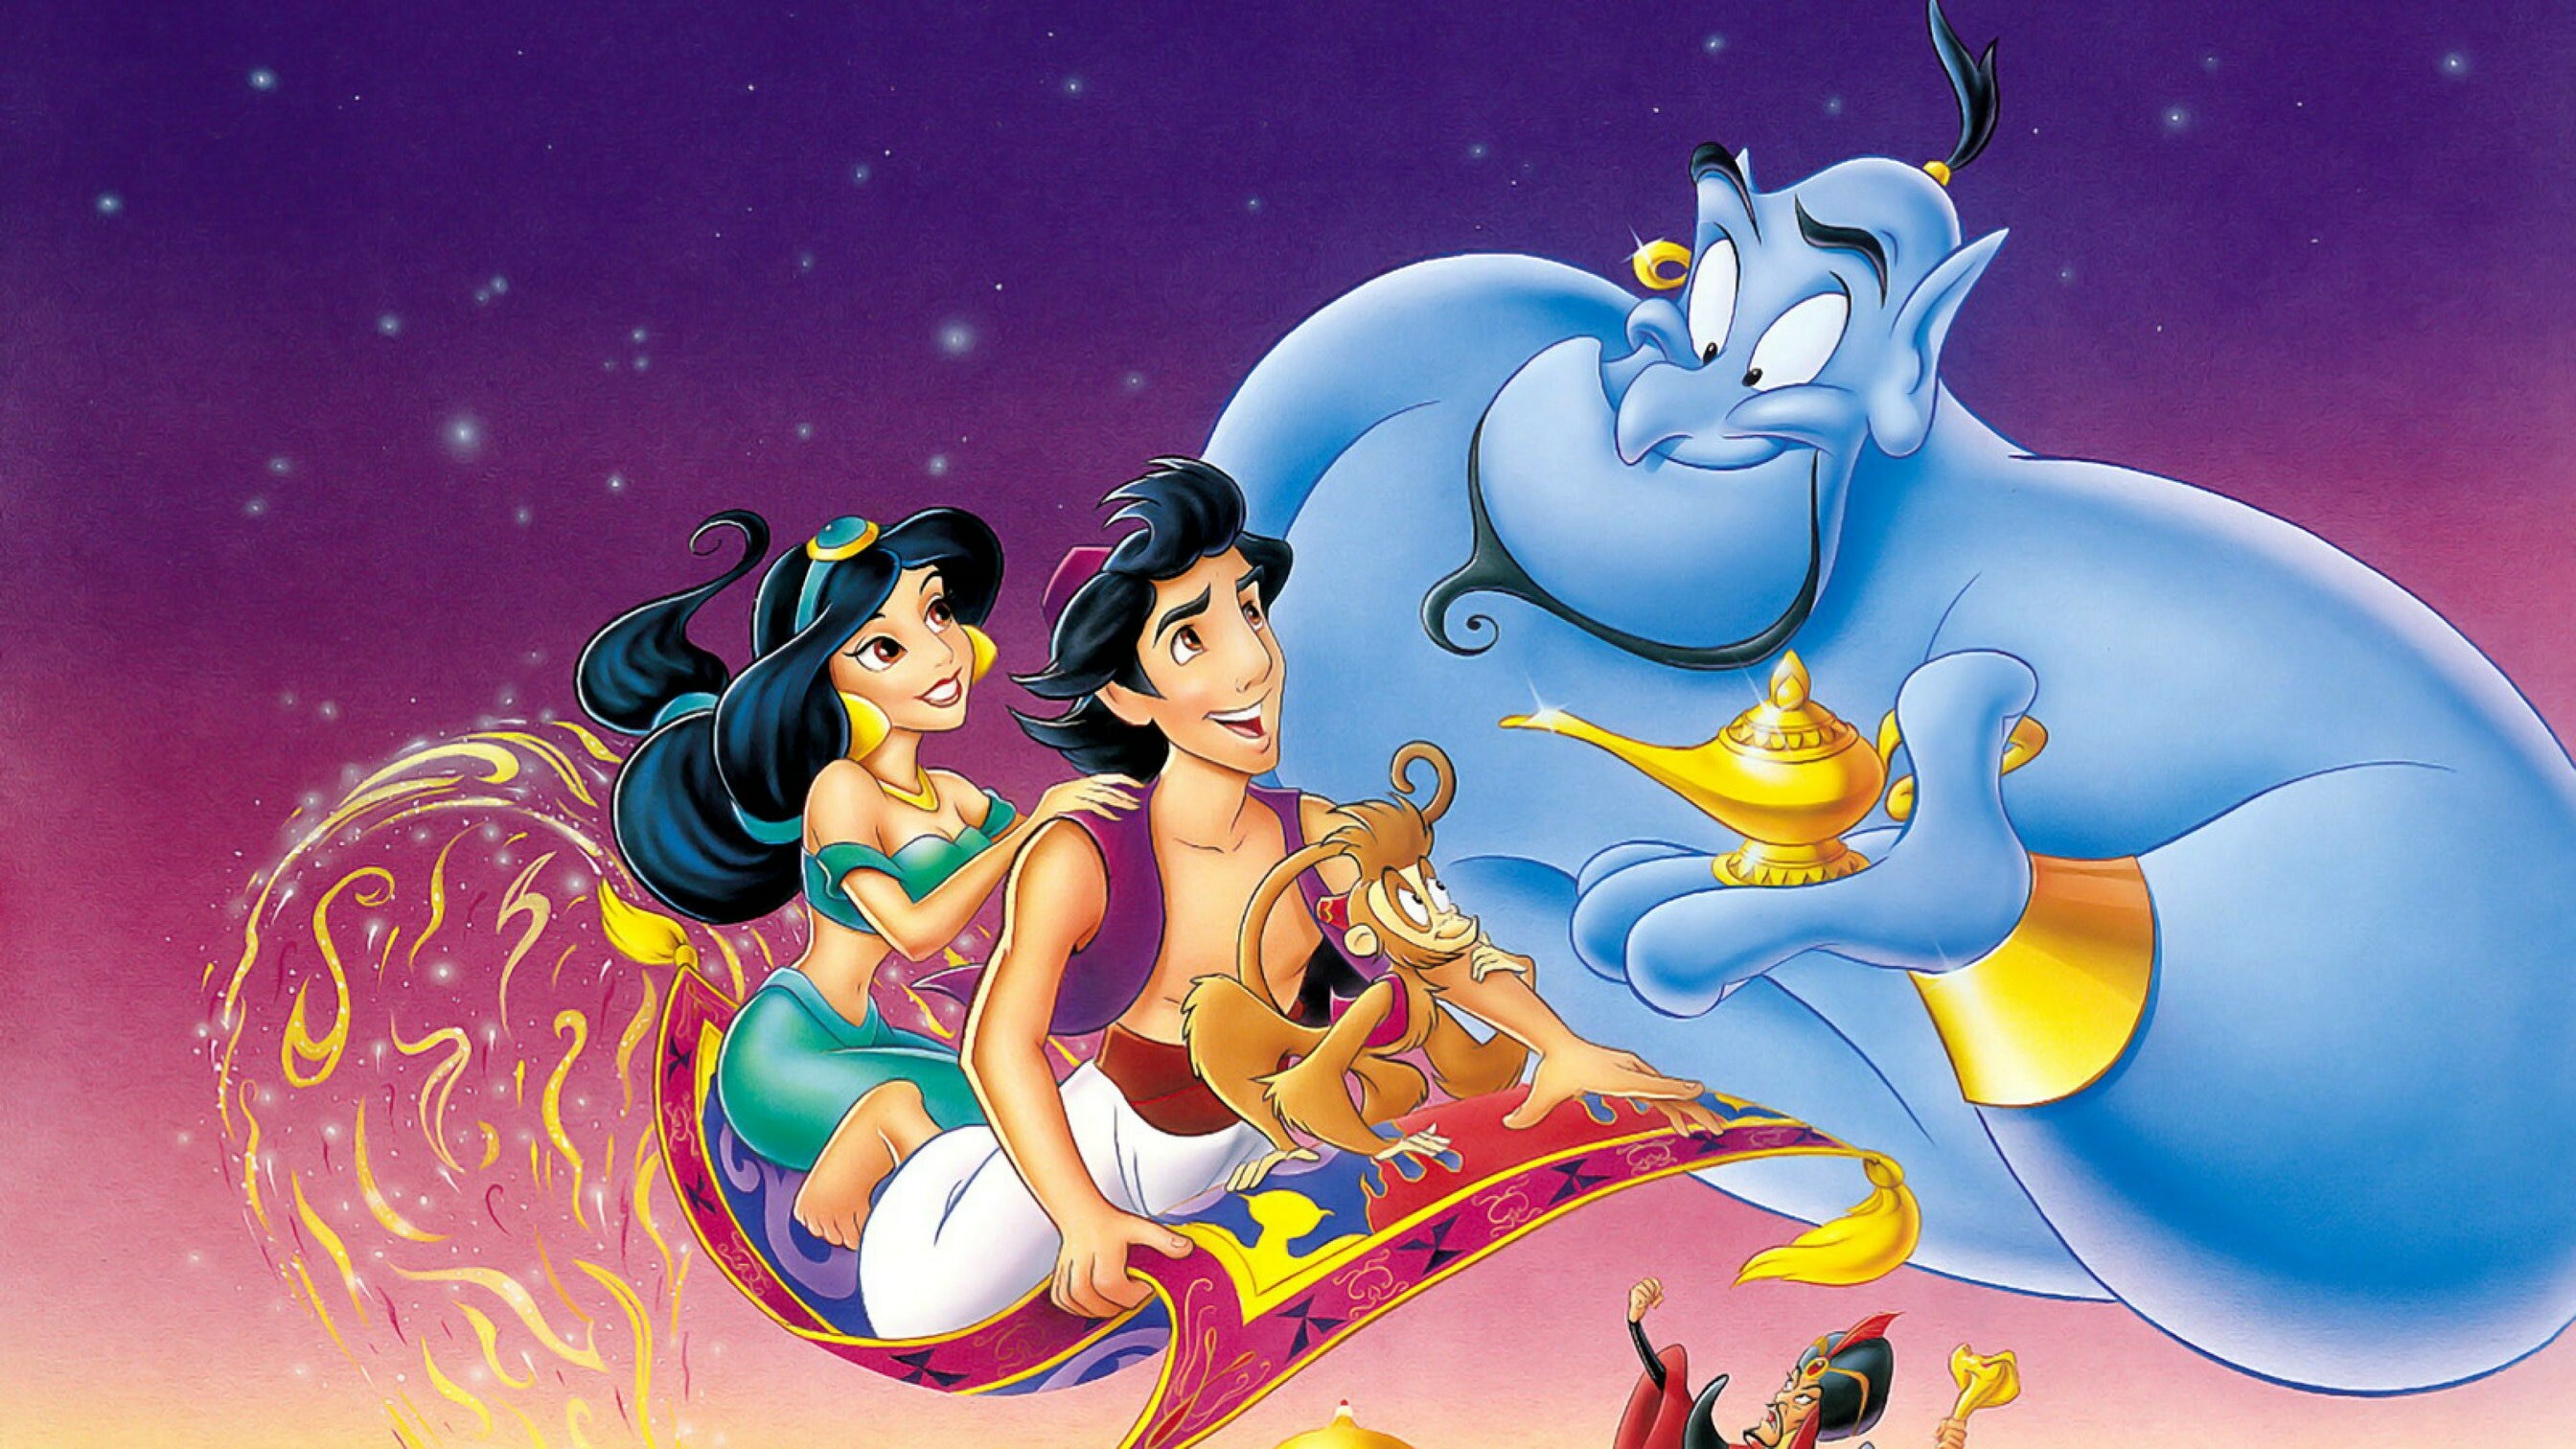 Aladdin (Cartoon): Upon release, it became the first animated feature to reach the half-billion-dollar mark and was the highest-grossing animated film of all time until it was surpassed by The Lion King in 1994. 2690x1520 HD Wallpaper.